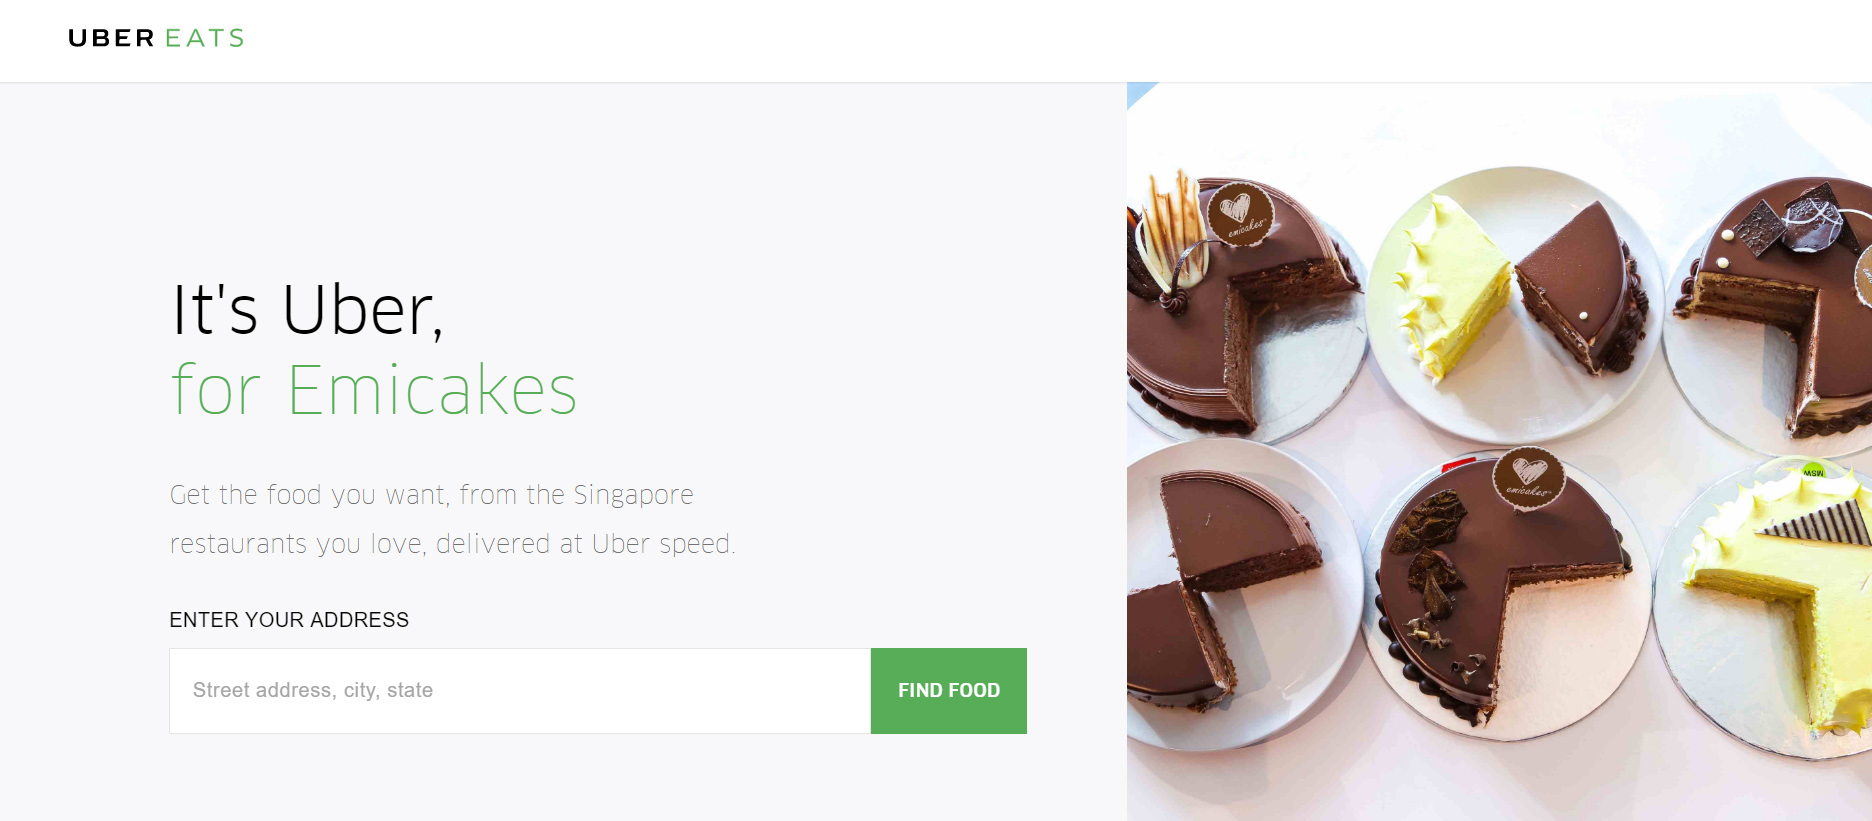 UberEATS Is Starting Food Delivery Services in Malaysia